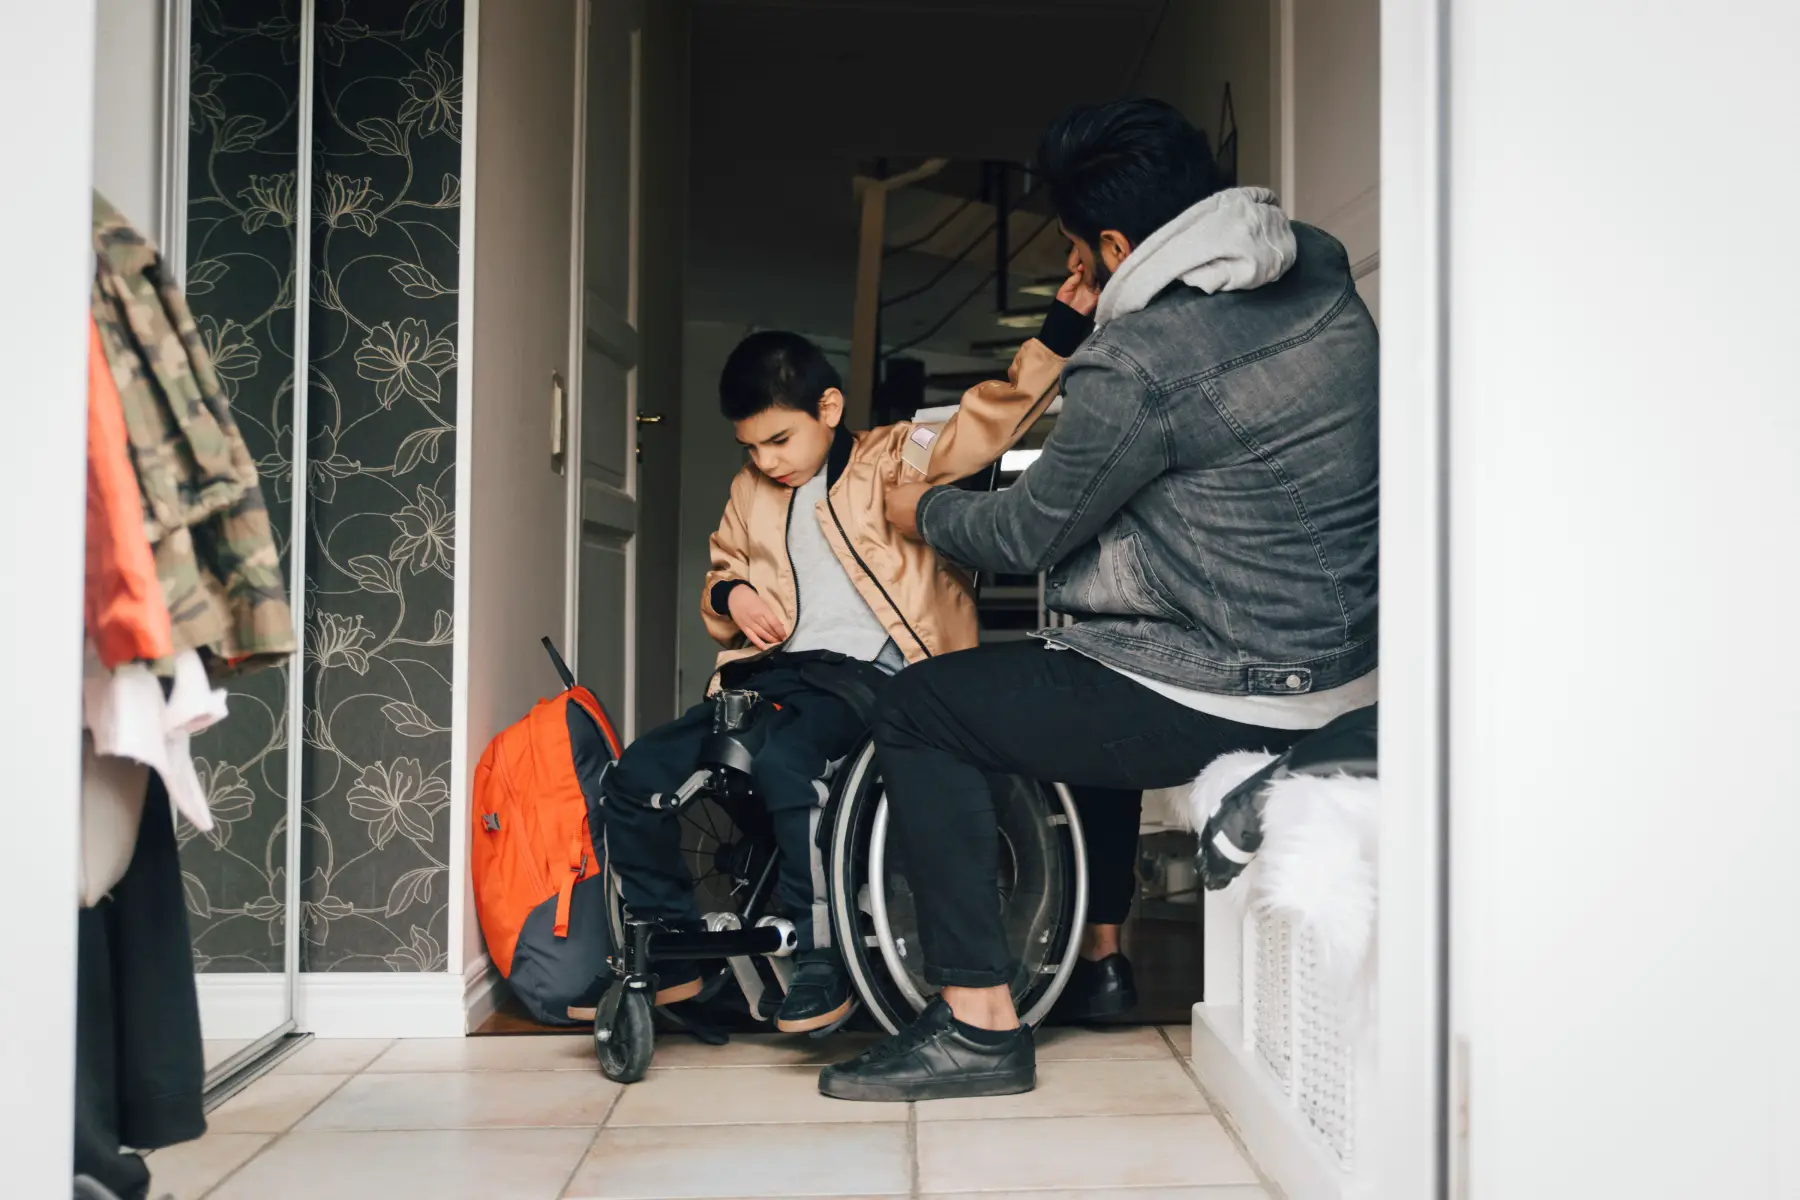 Dad helping son with disabilities (using a wheelchair) putting jacket on